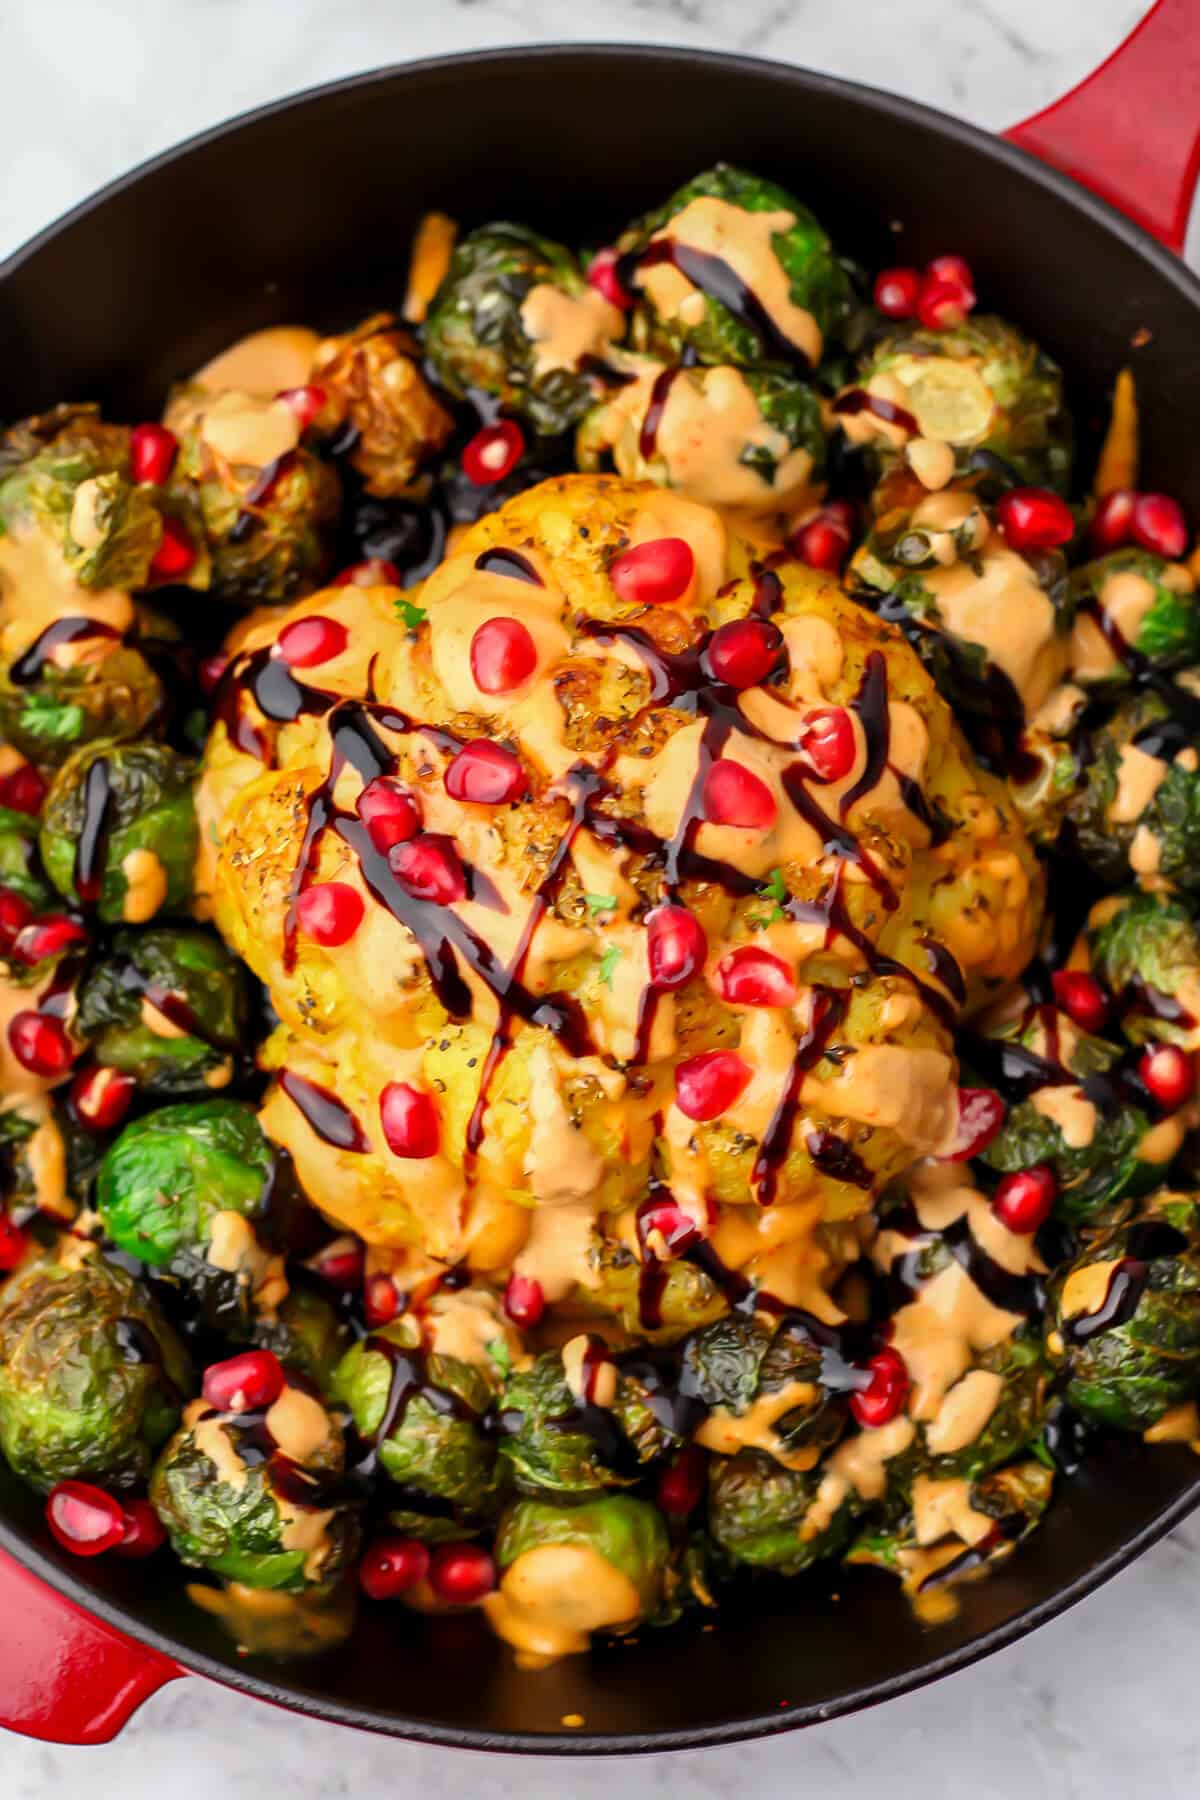 A top view of a whole head of cauliflower that has been roasted and drizzled with spicy tahini sauce, balsamic glaze and pomegranate seeds.